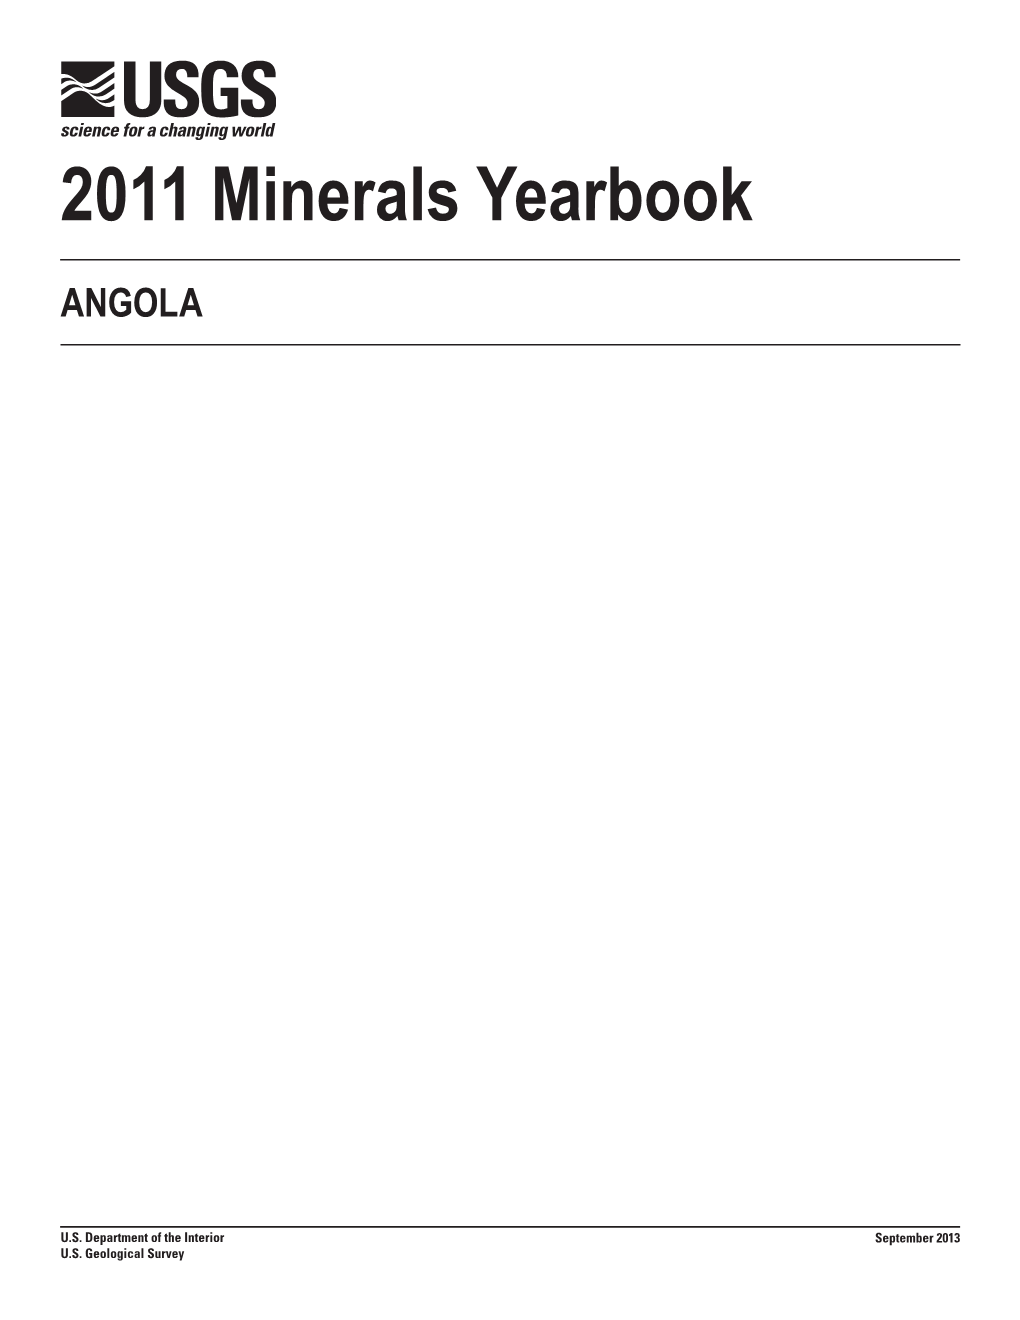 The Mineral Industry of Angola in 2011